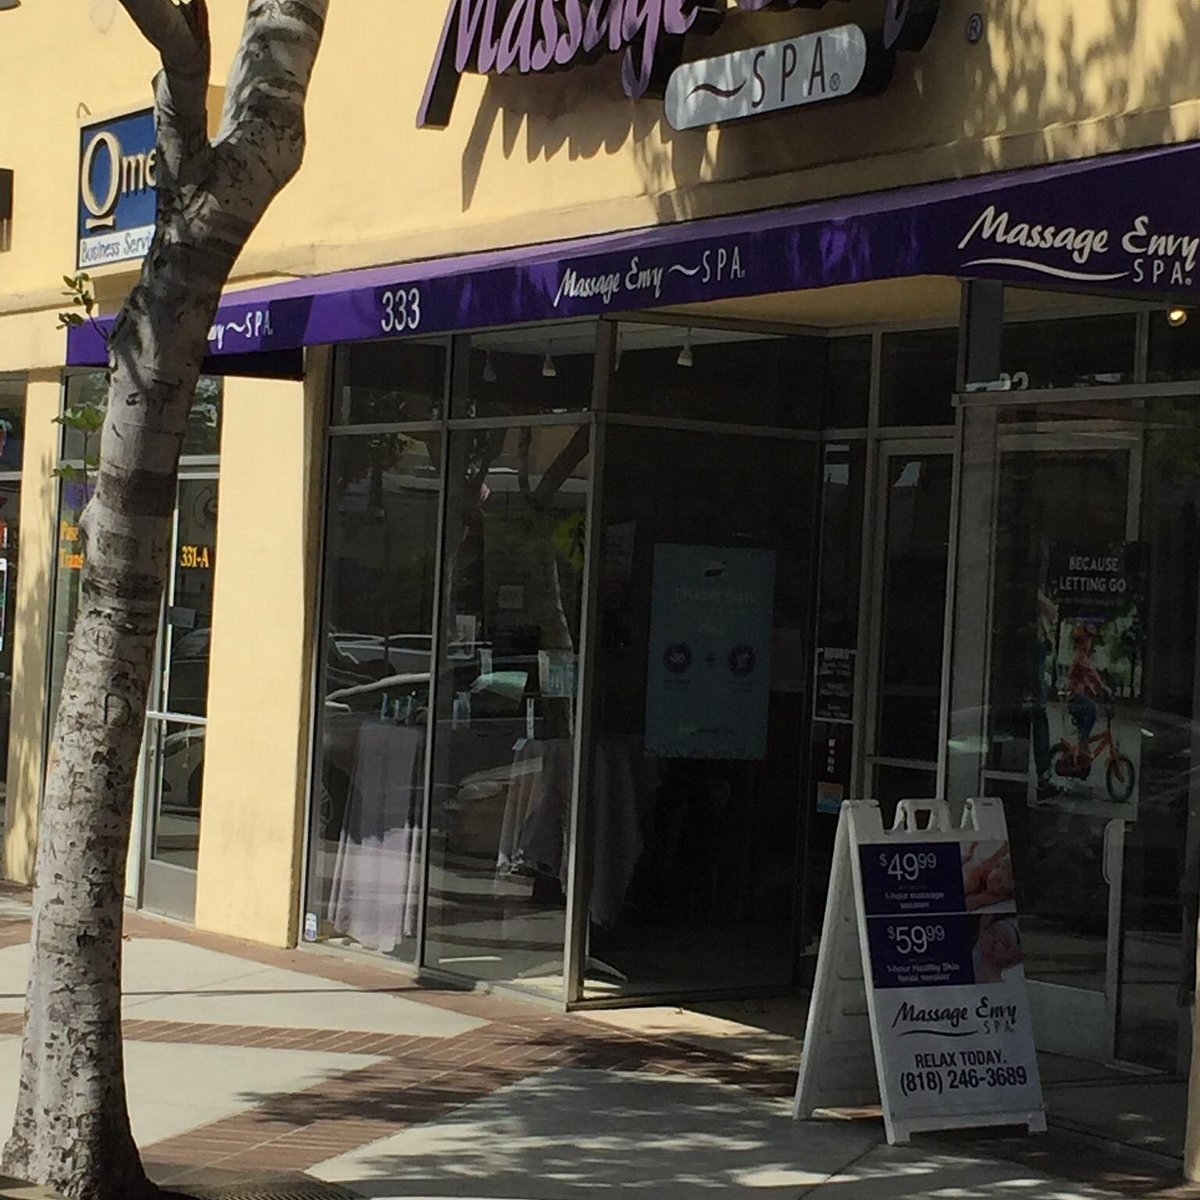 Massage Envy Spa Glendale All You Need To Know Before You Go